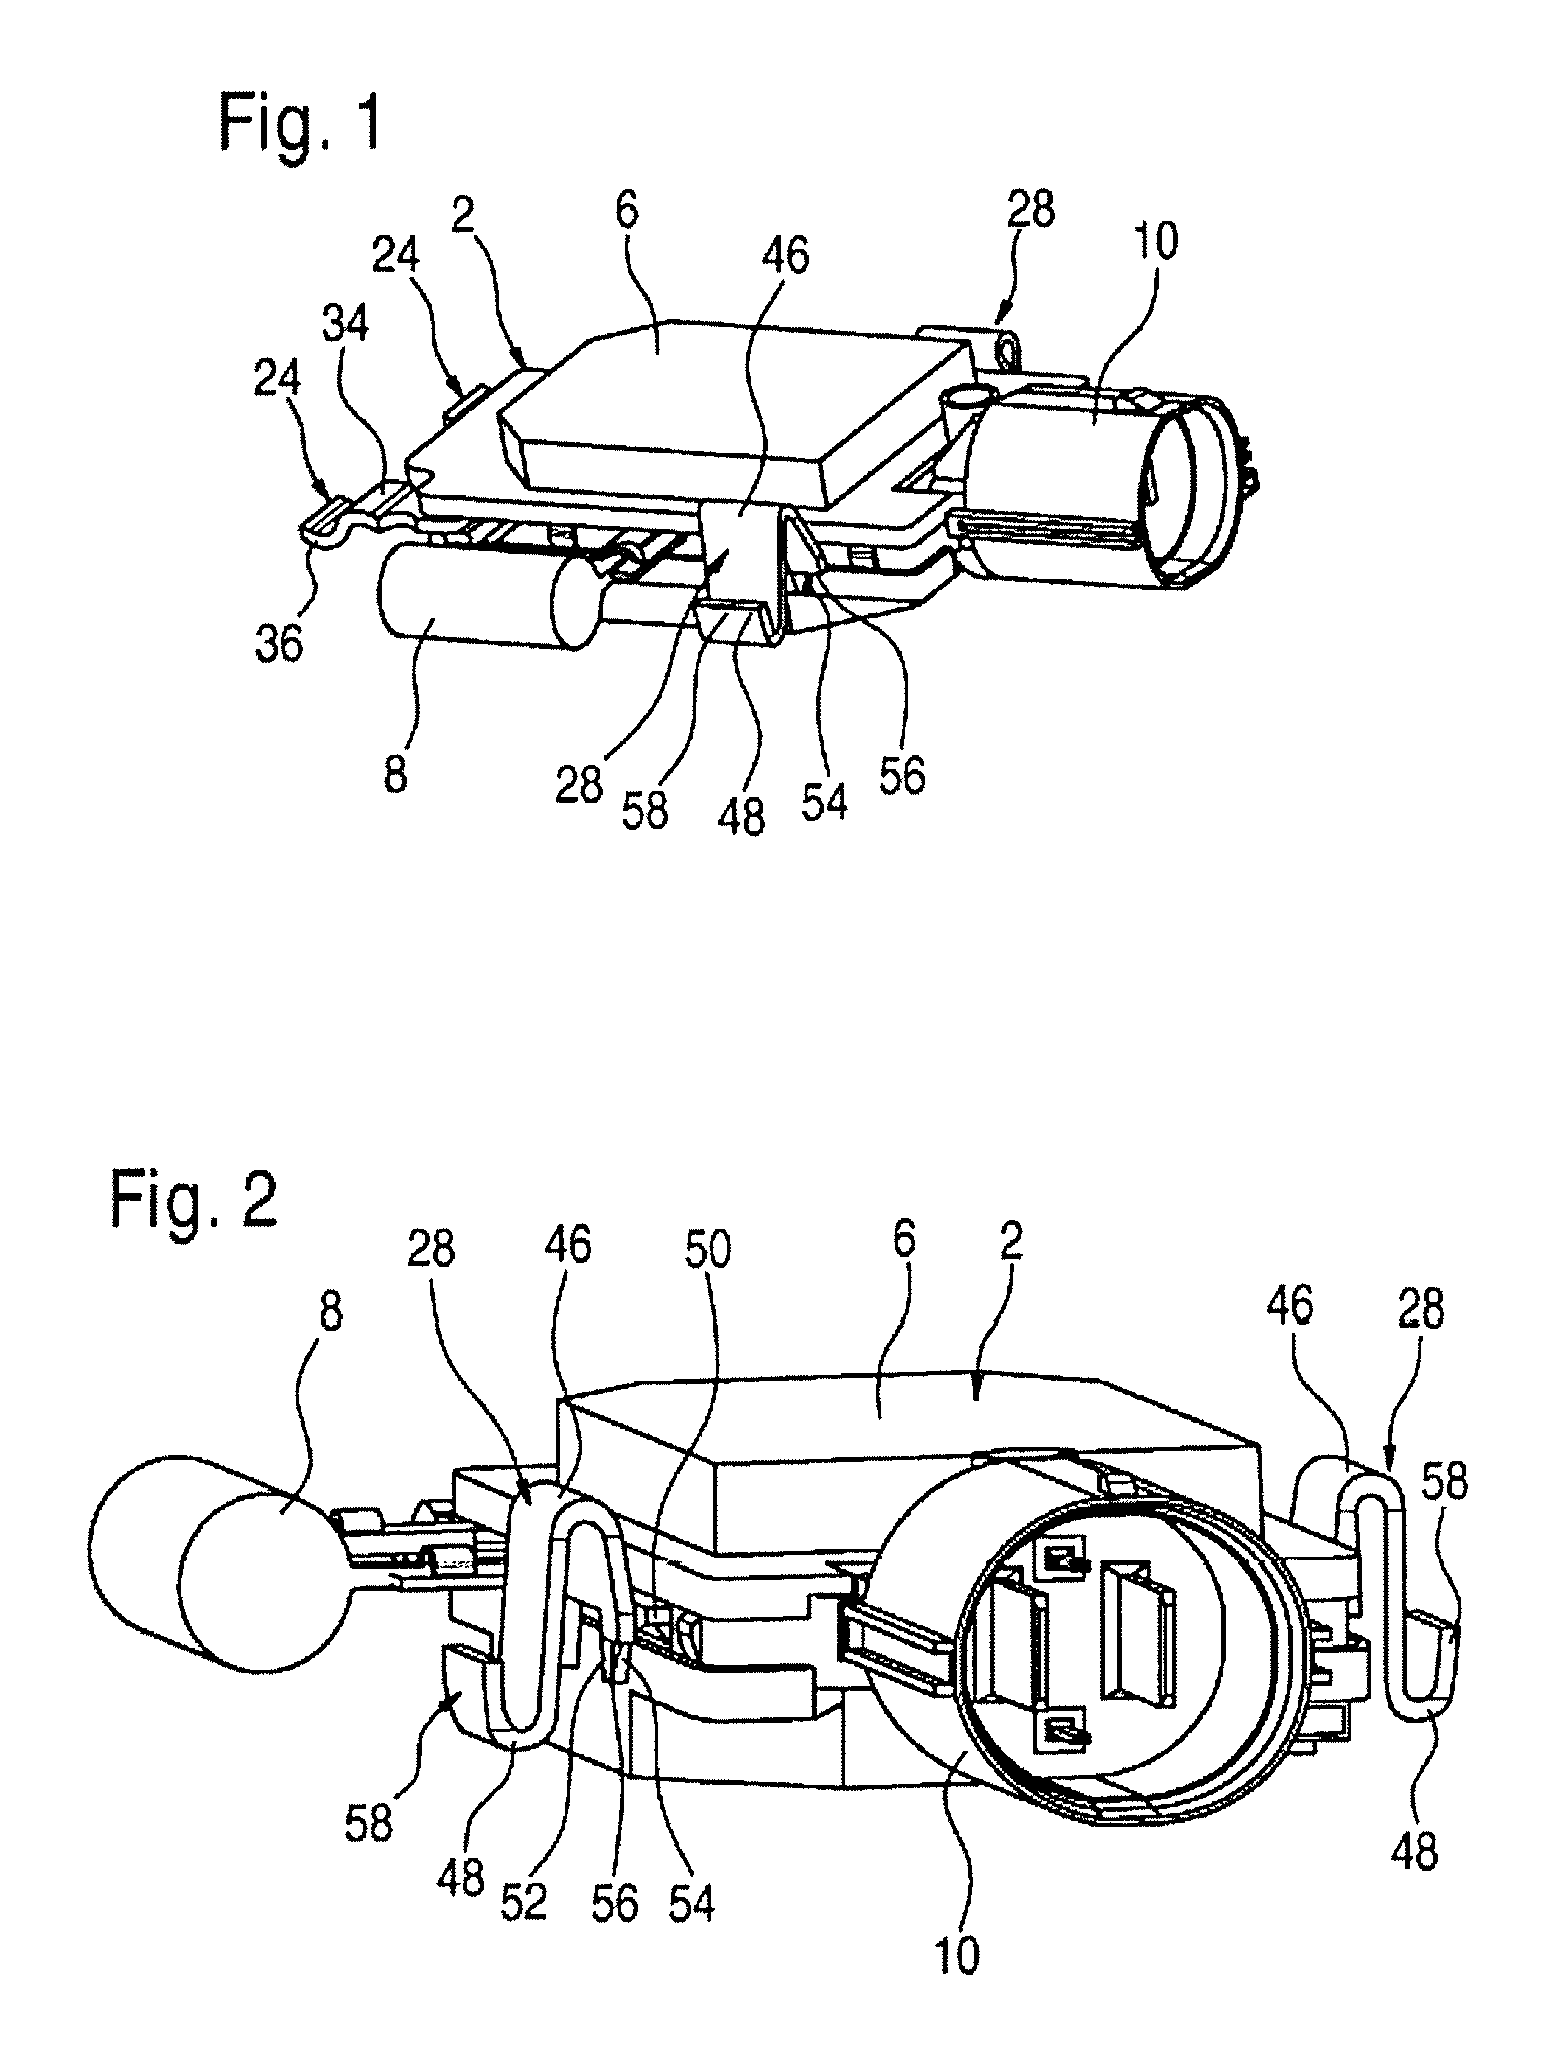 Electronic module for a fan of an internal combustion engine in a motor vehicle